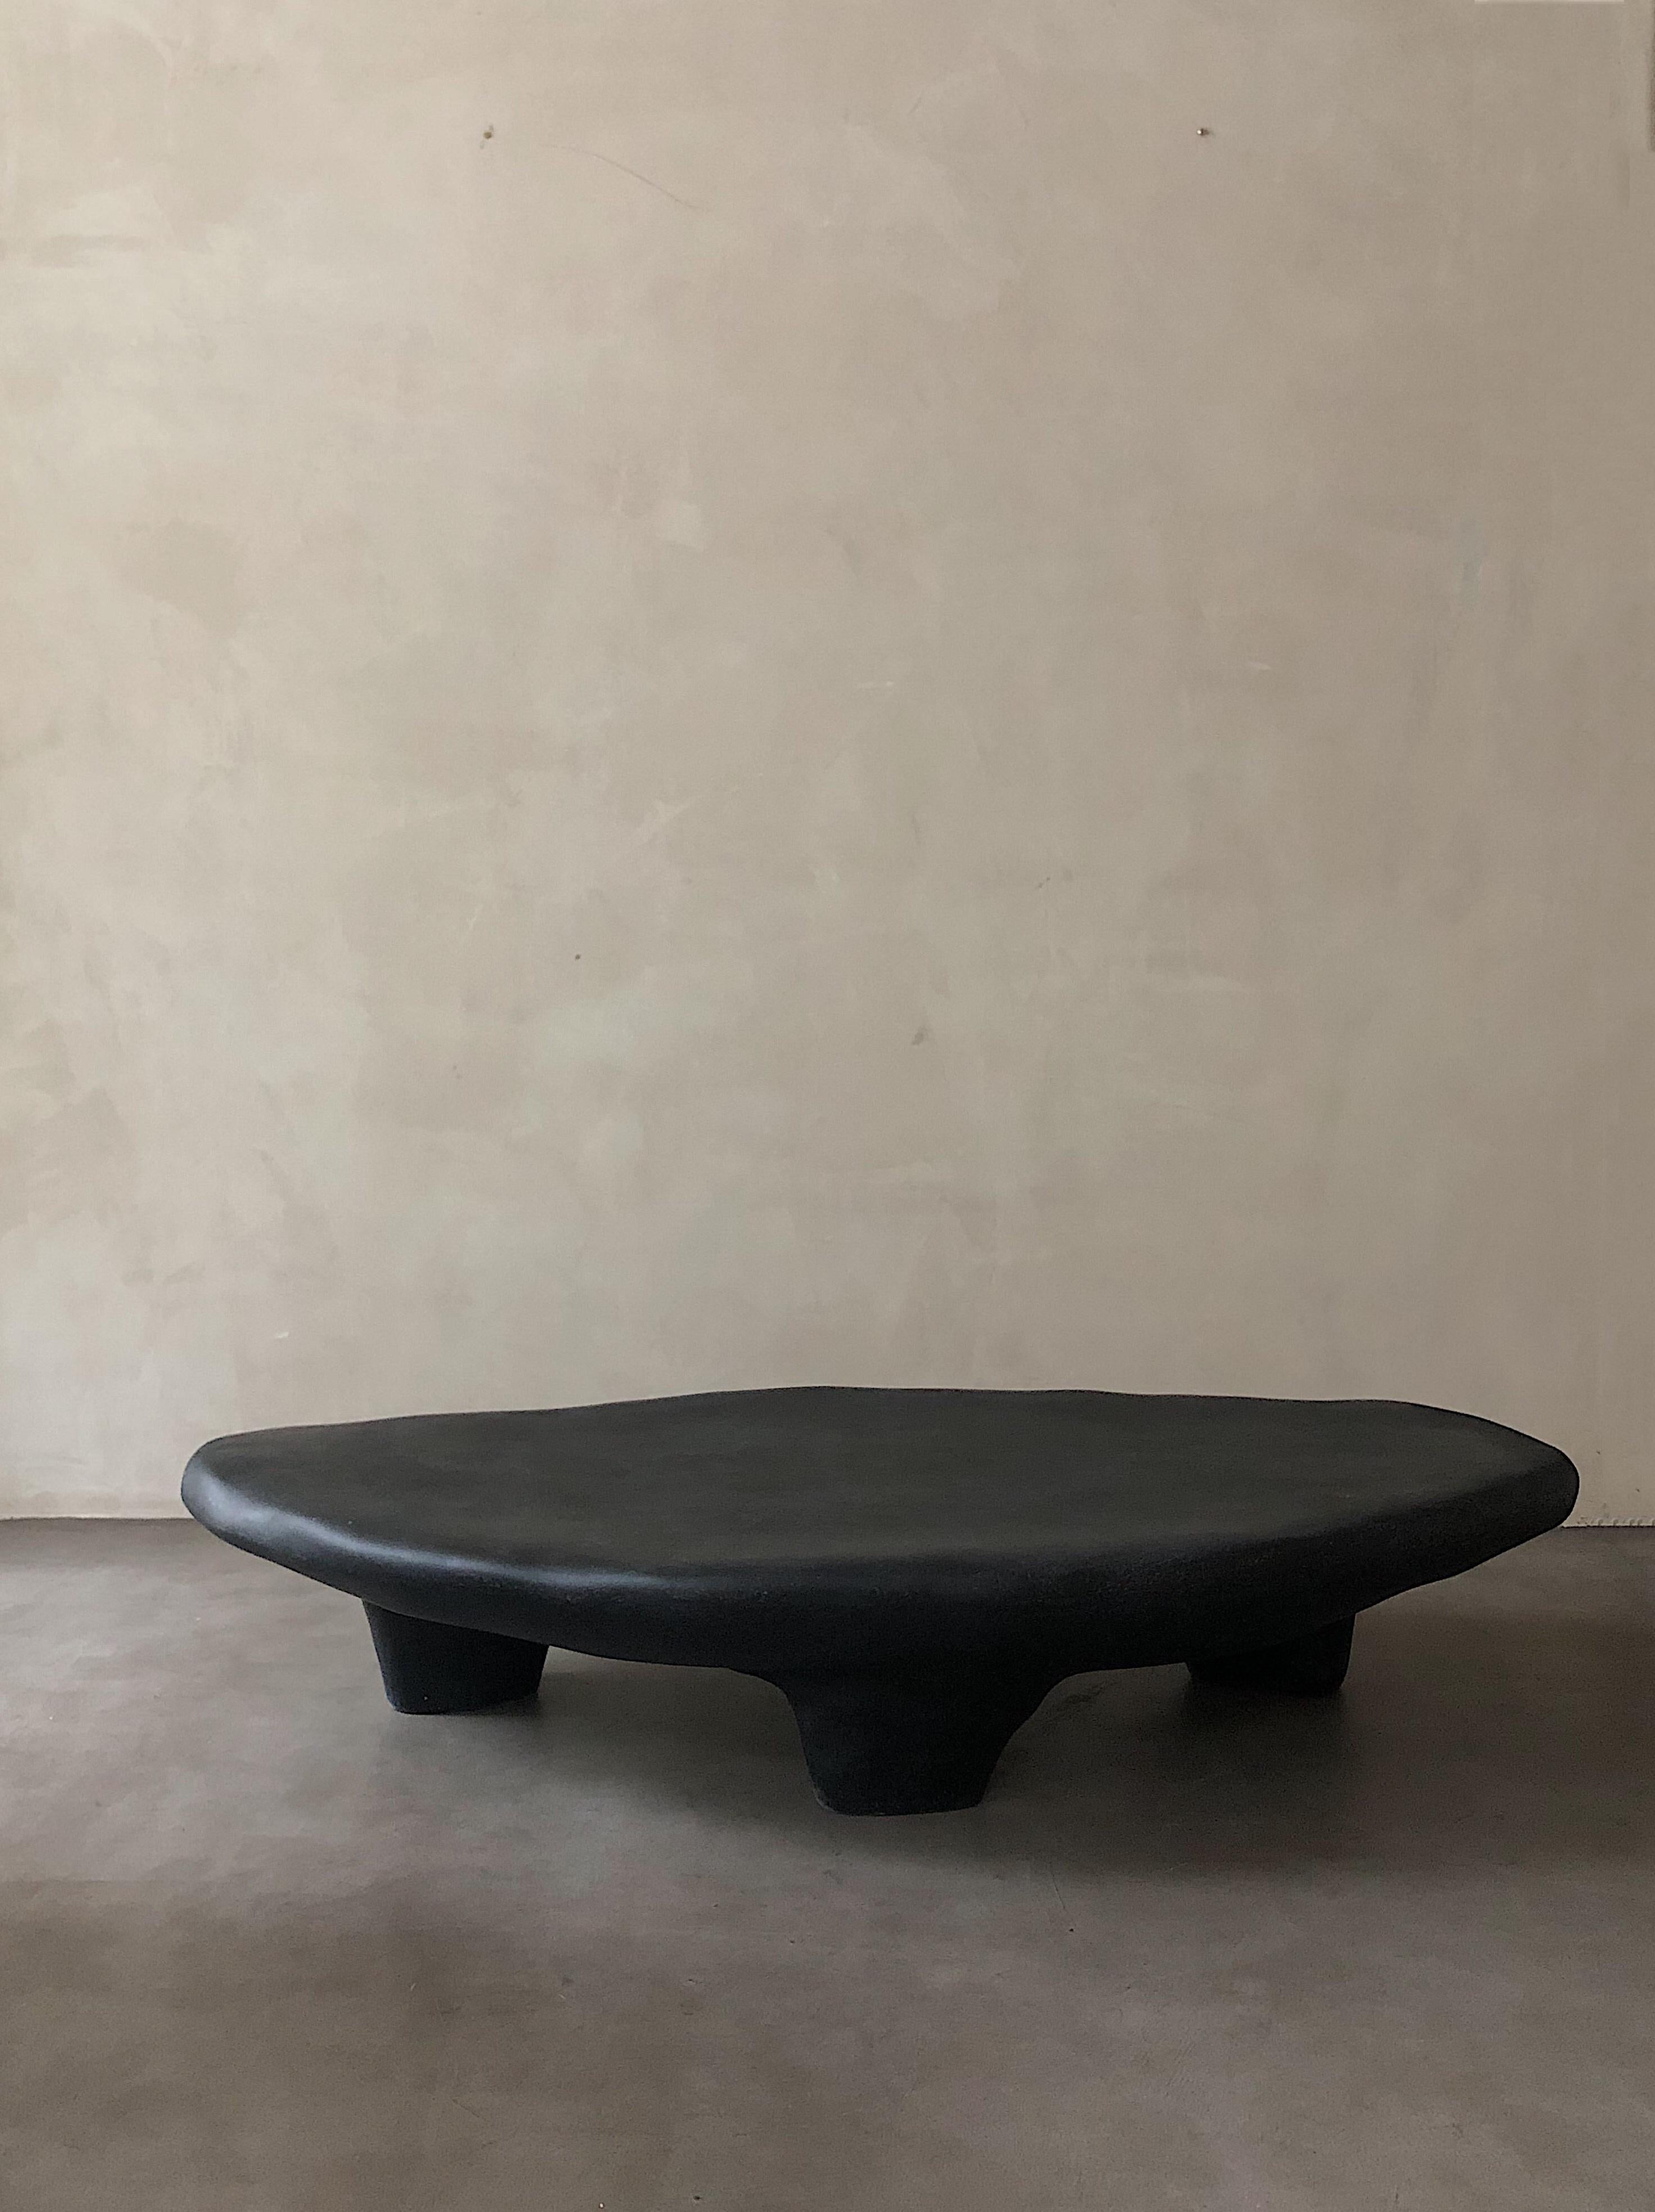 Black Tripod Coffee Table by Karstudio.
Materials: FRP.
Dimensions: 150 x 85 x 30 cm.
*This piece is suitable for outdoor use.

Inspired by three-leg utensils, which were the first creation of human beings in ancient times. The triangle structure